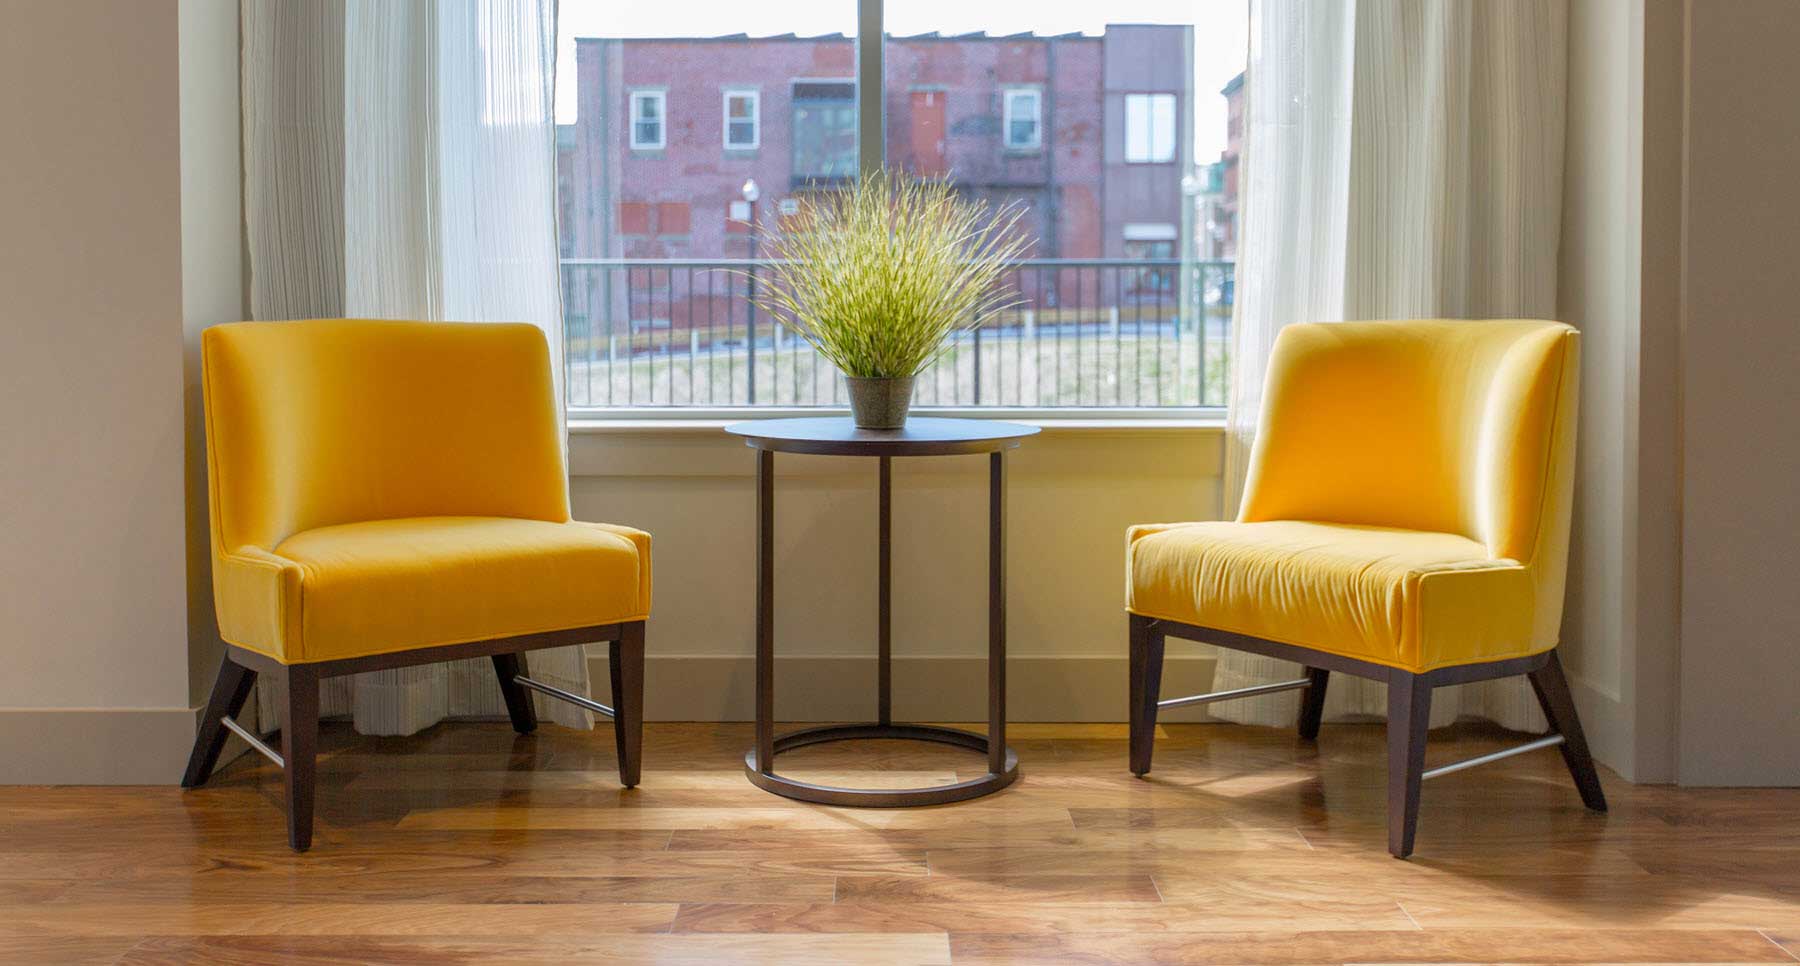 two yellow chairs facing each other ready for a professional counseling session